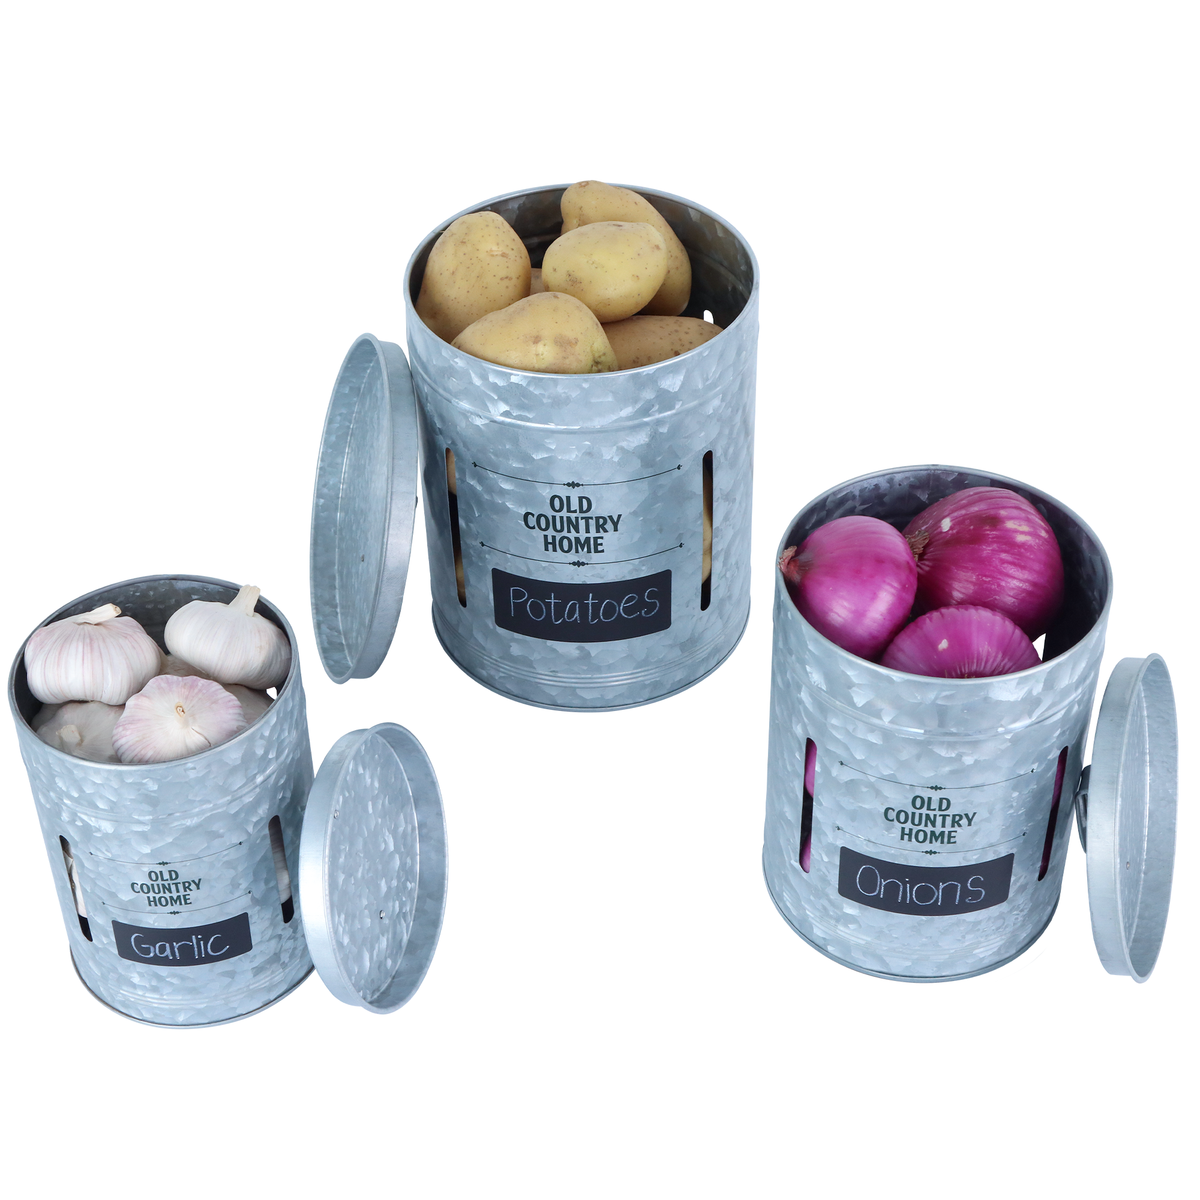 Galvanized Veggie Canisters with Potato, Garlic and Onion inside